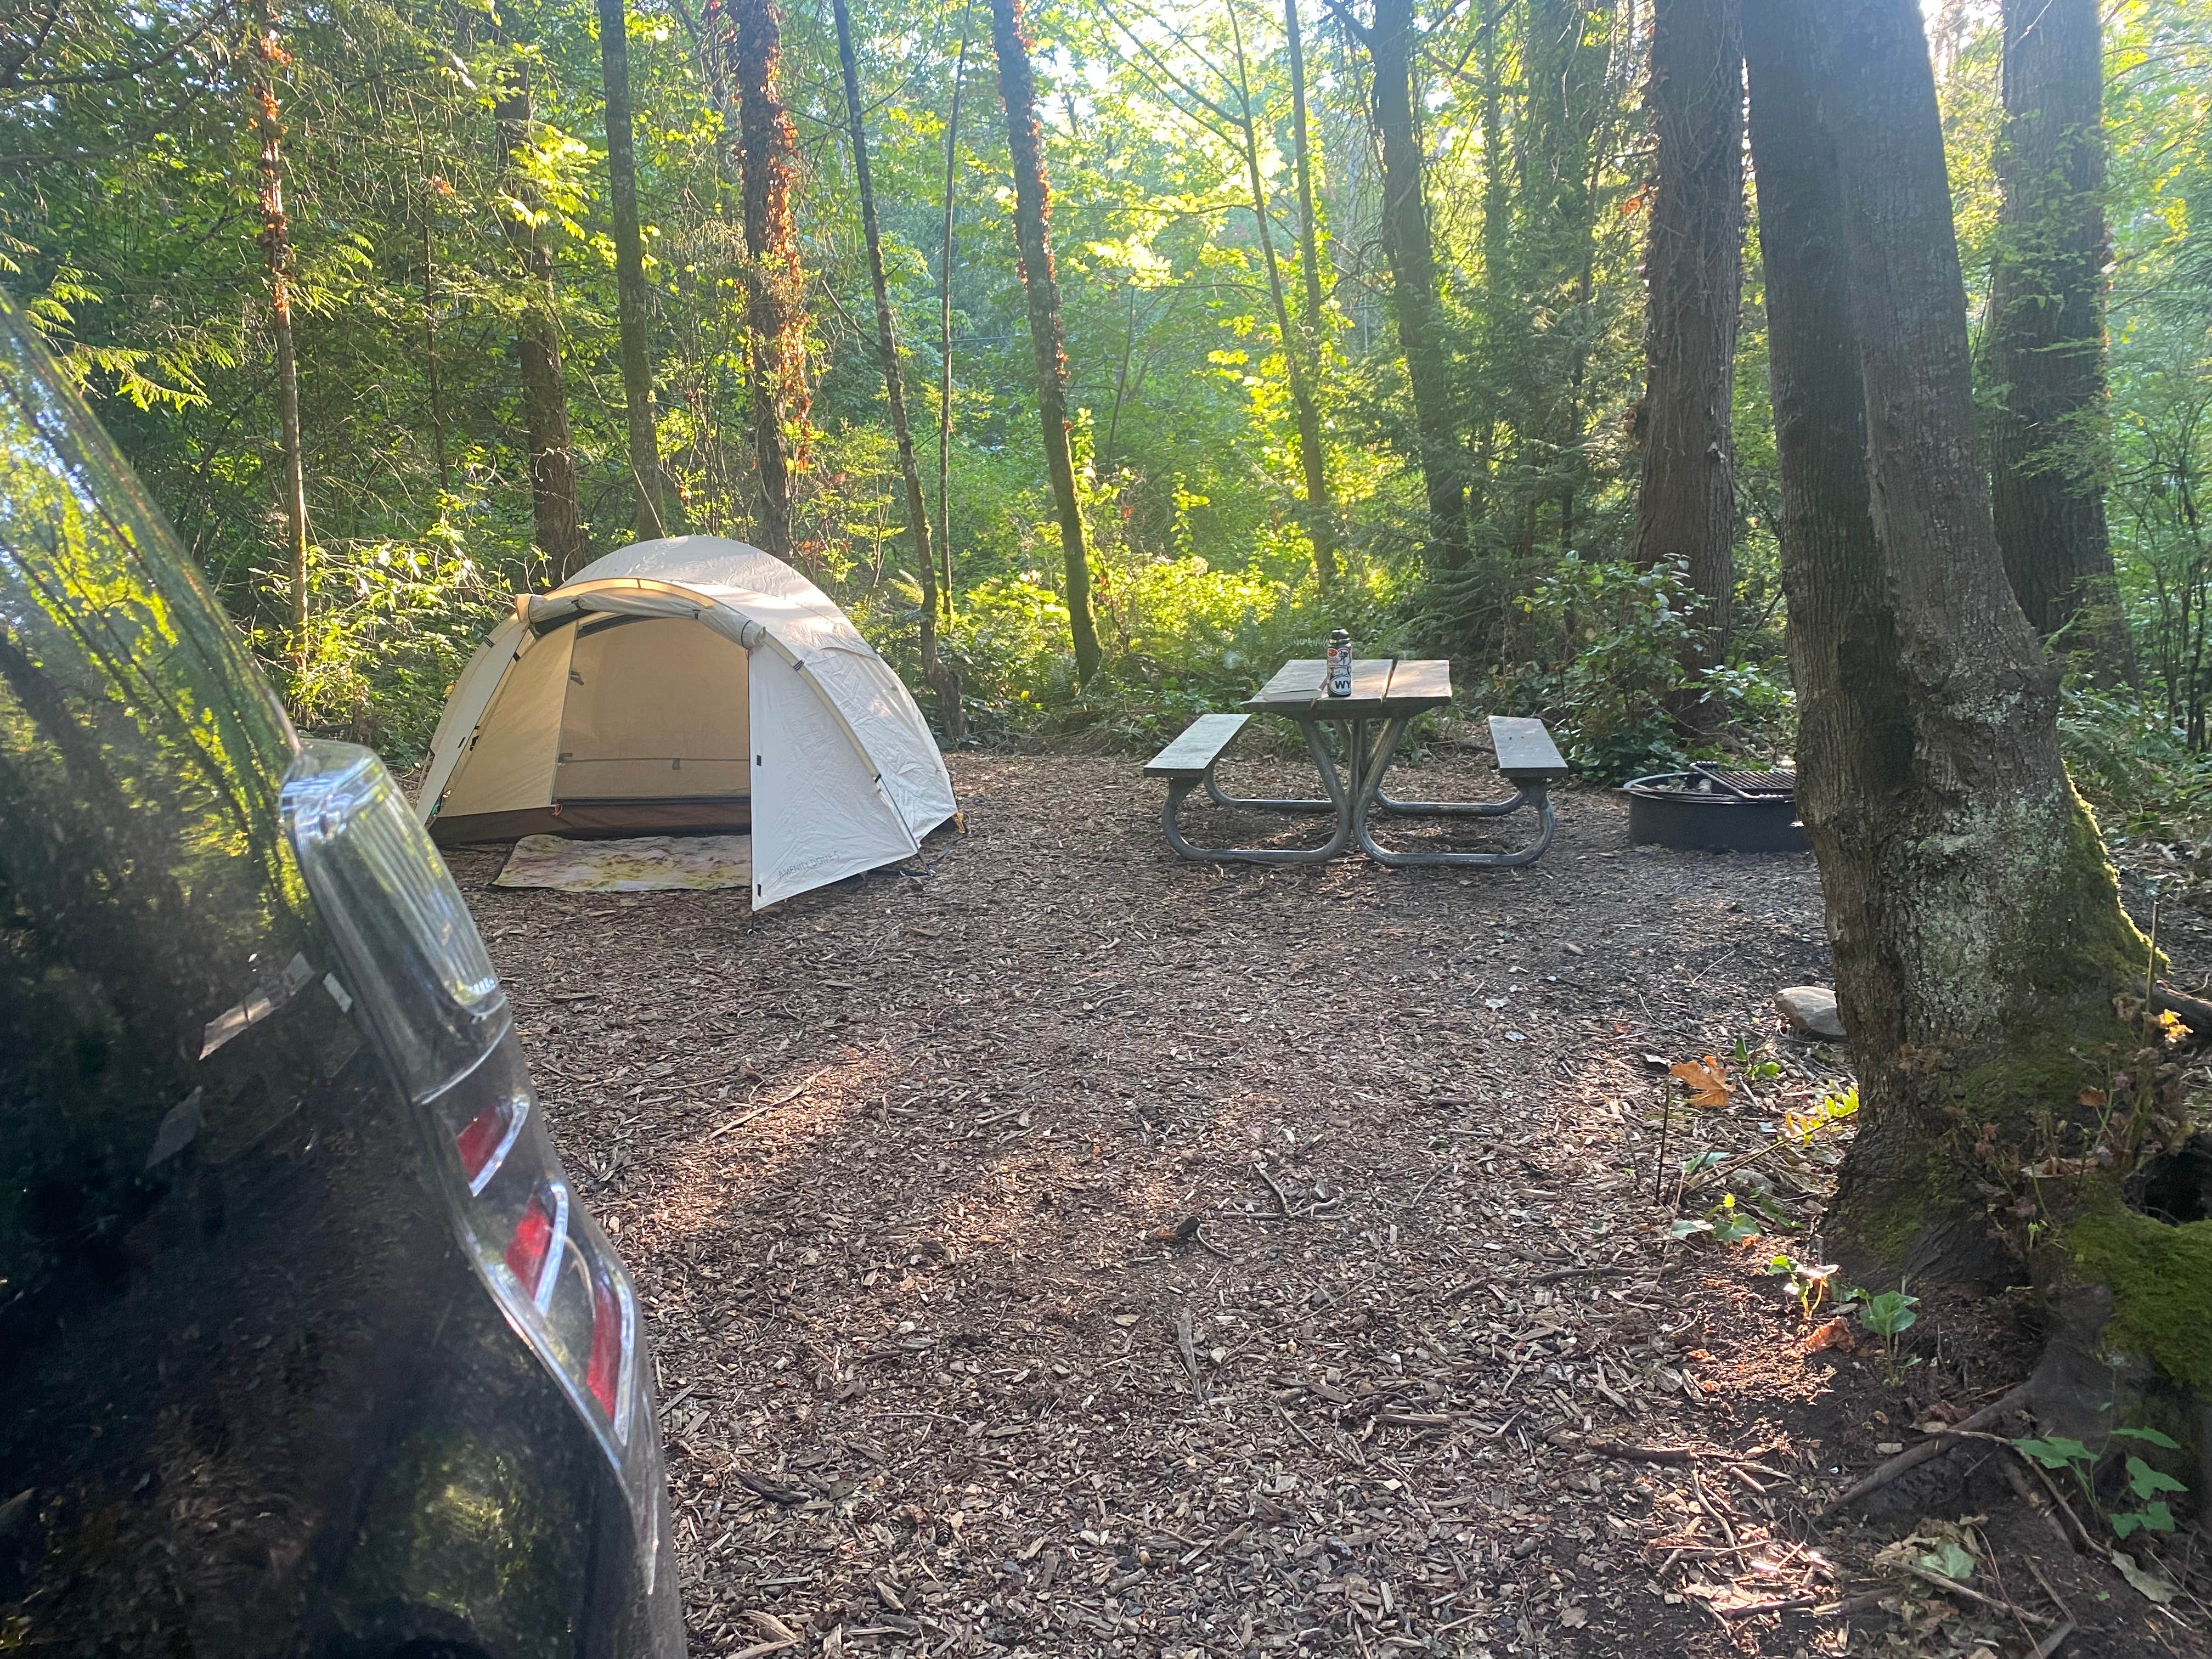 Camper submitted image from Fay Bainbridge Park - 1